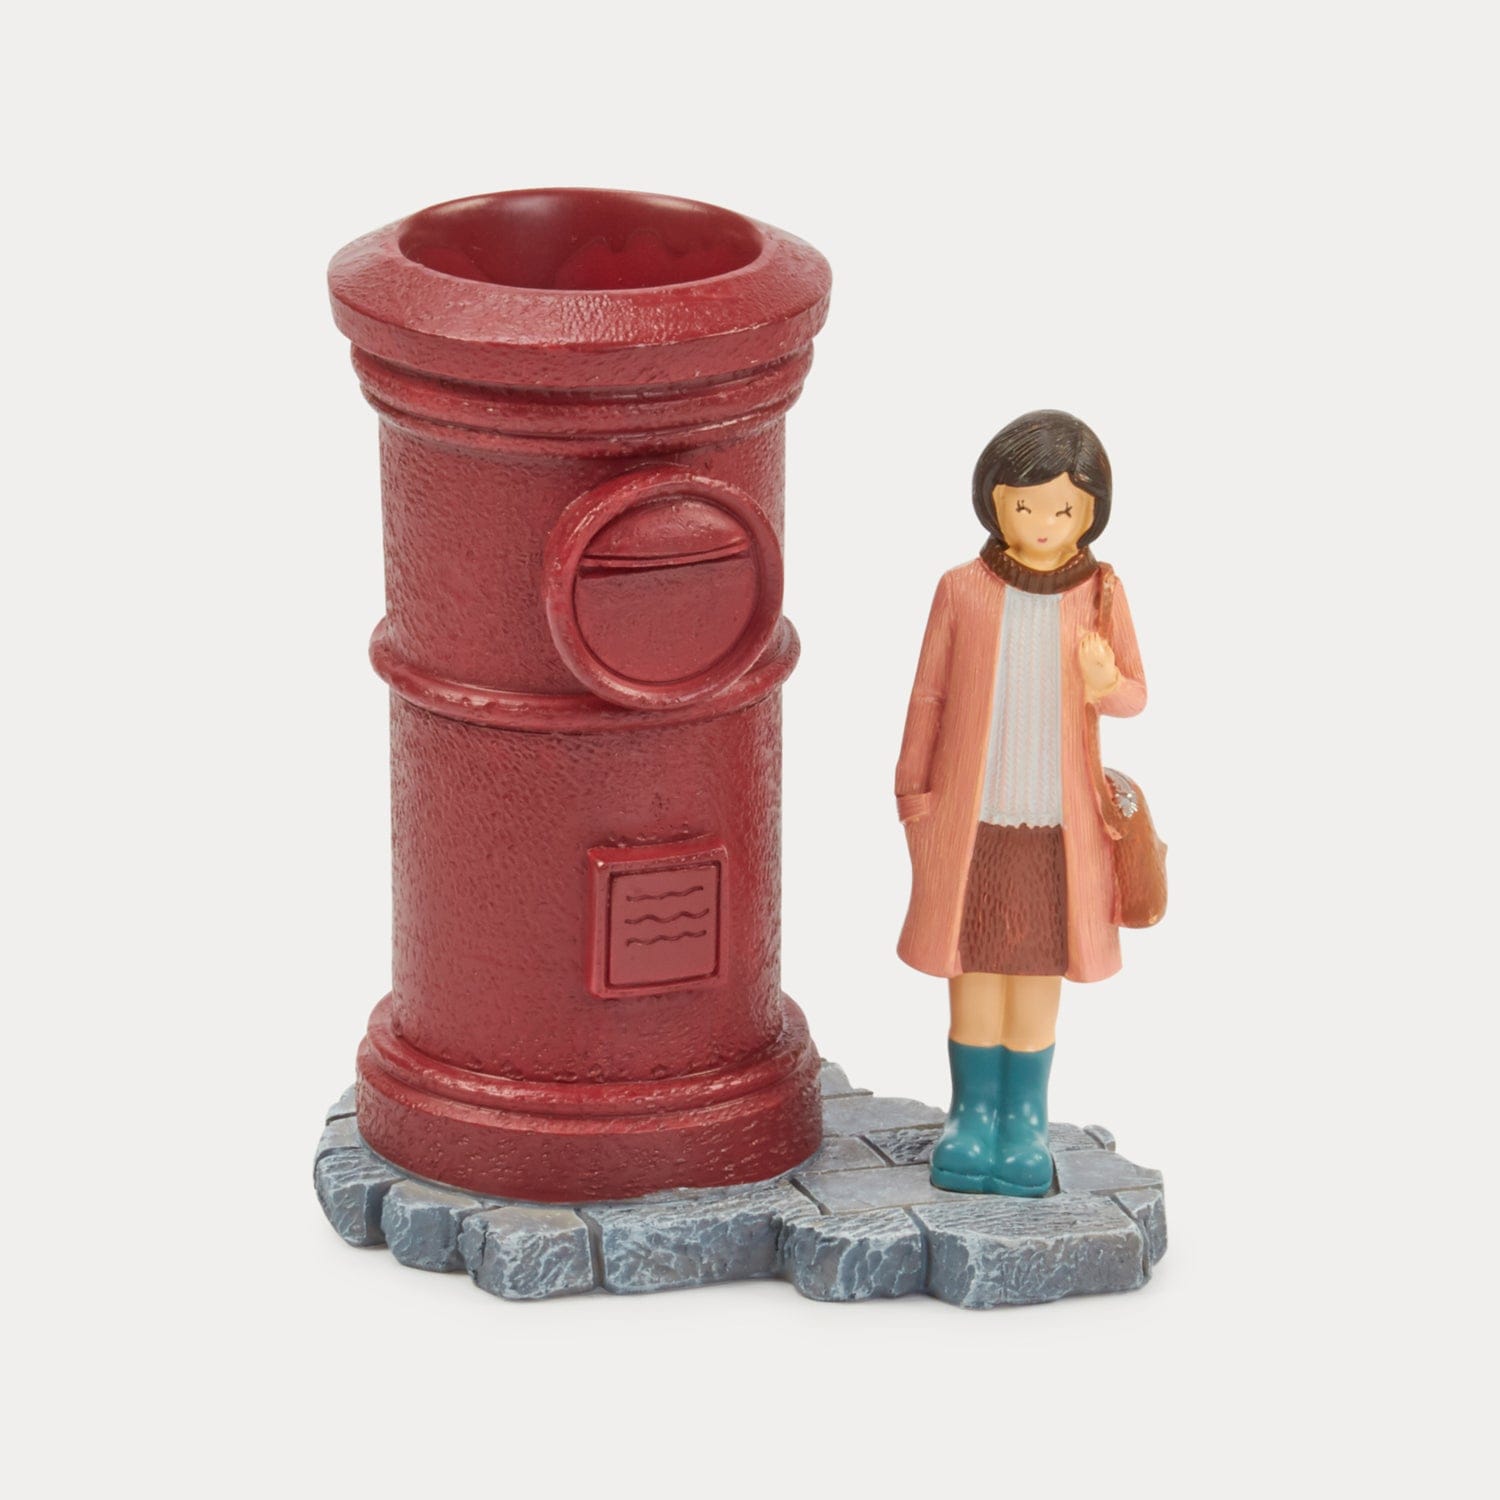 Red Butler Showpieces Girl & the Pen stand DSGP00R06Y18A1 AGP06A1 Post Box Pen Holder – Utility Meets Whimsy for Your Desk Redbutler